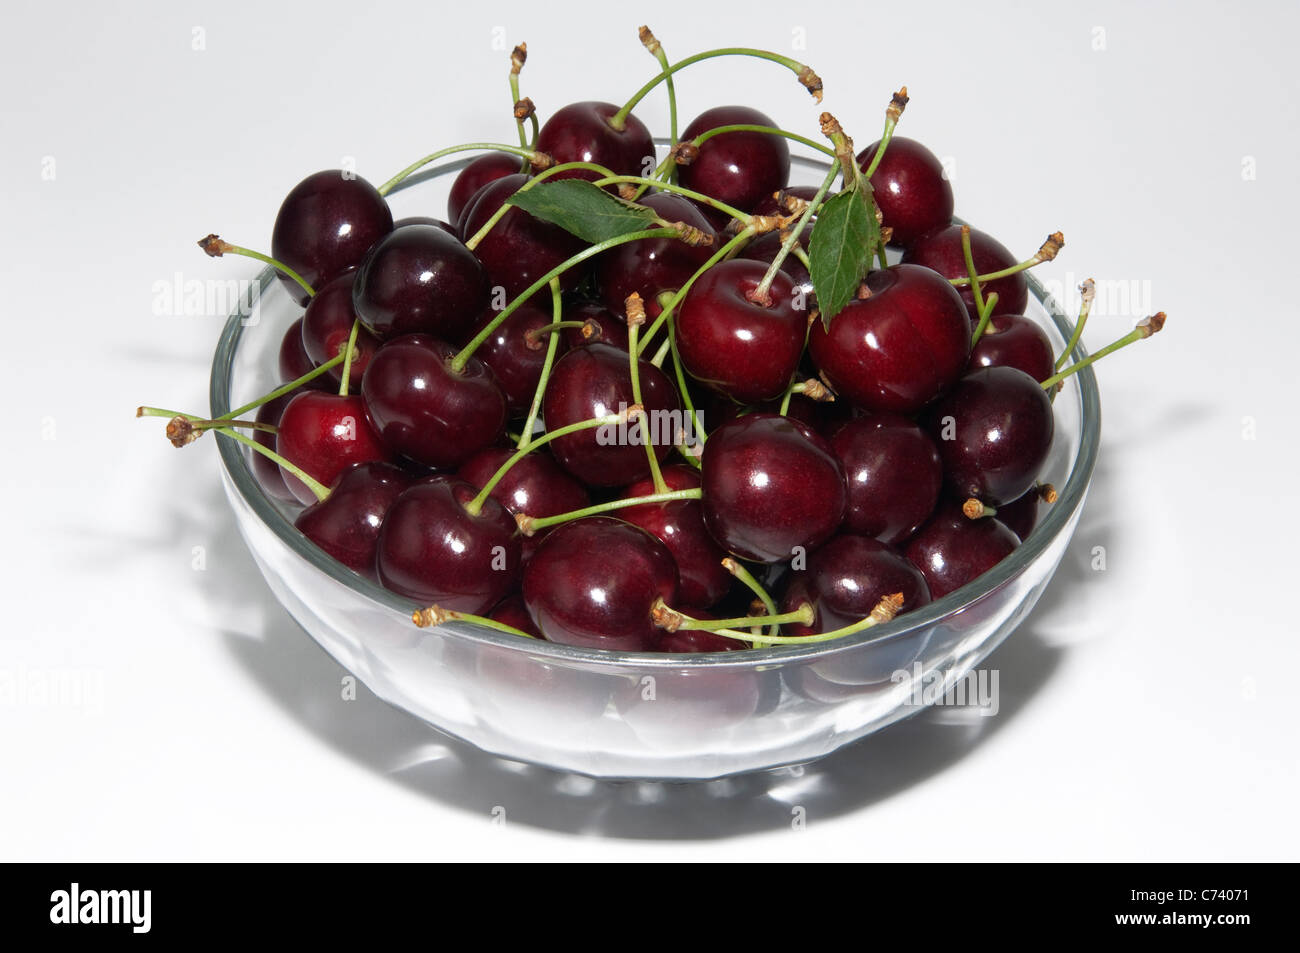 Sweet Cherry (Prunus avium). Ripe cherries in a glass bowl. Studio picture against a white background. Stock Photo